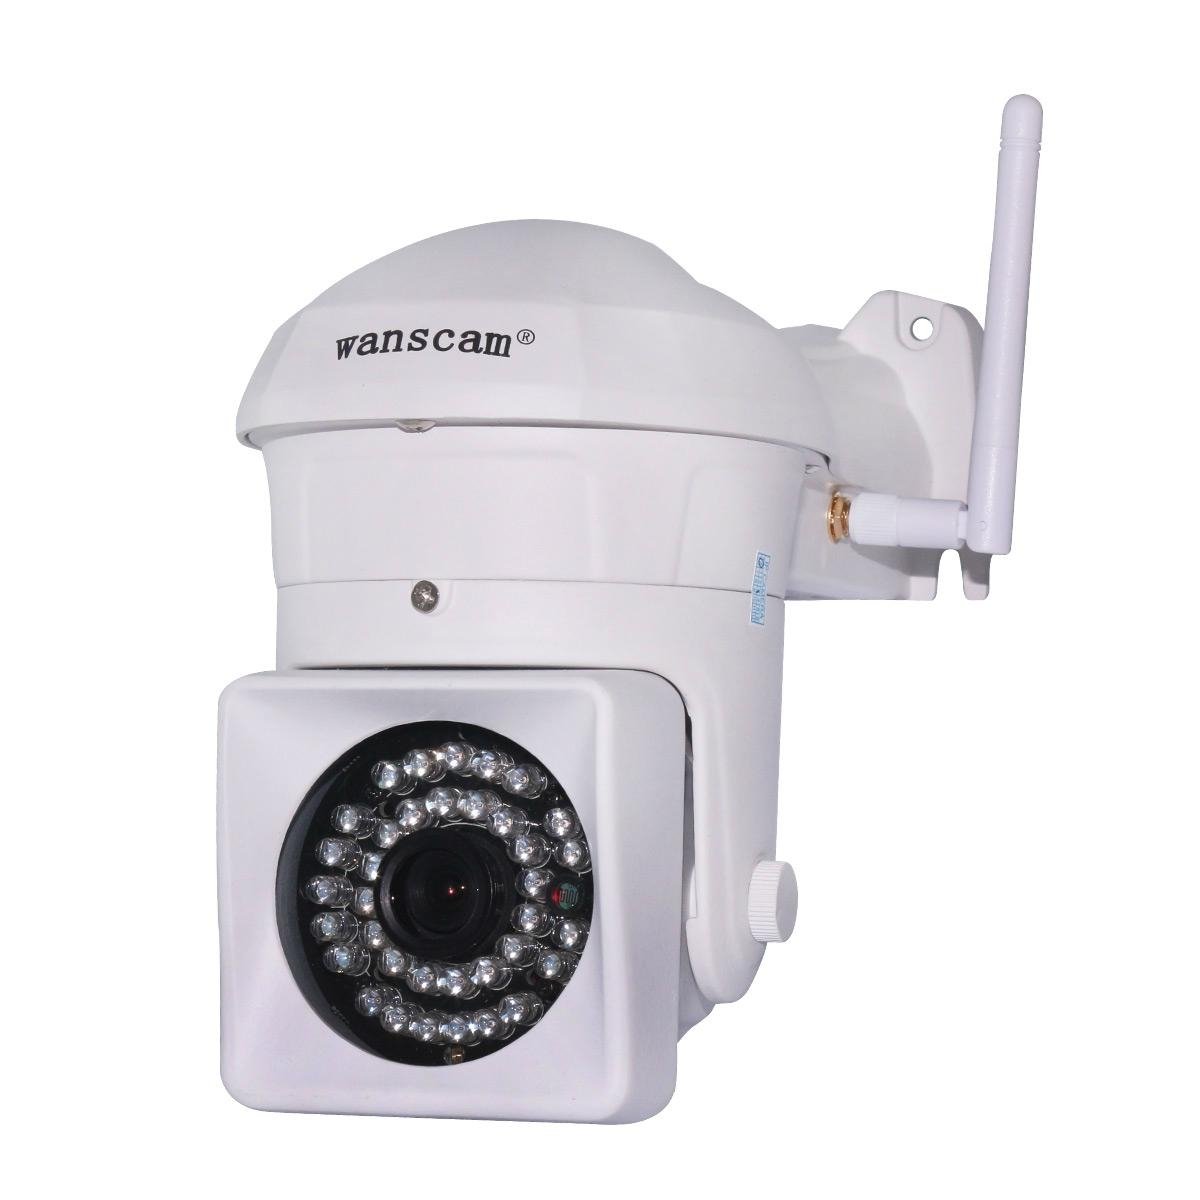 WANSCAM 720P HD IR Cut Wireless Outdoor Night Vision Security Network IP Camera 3